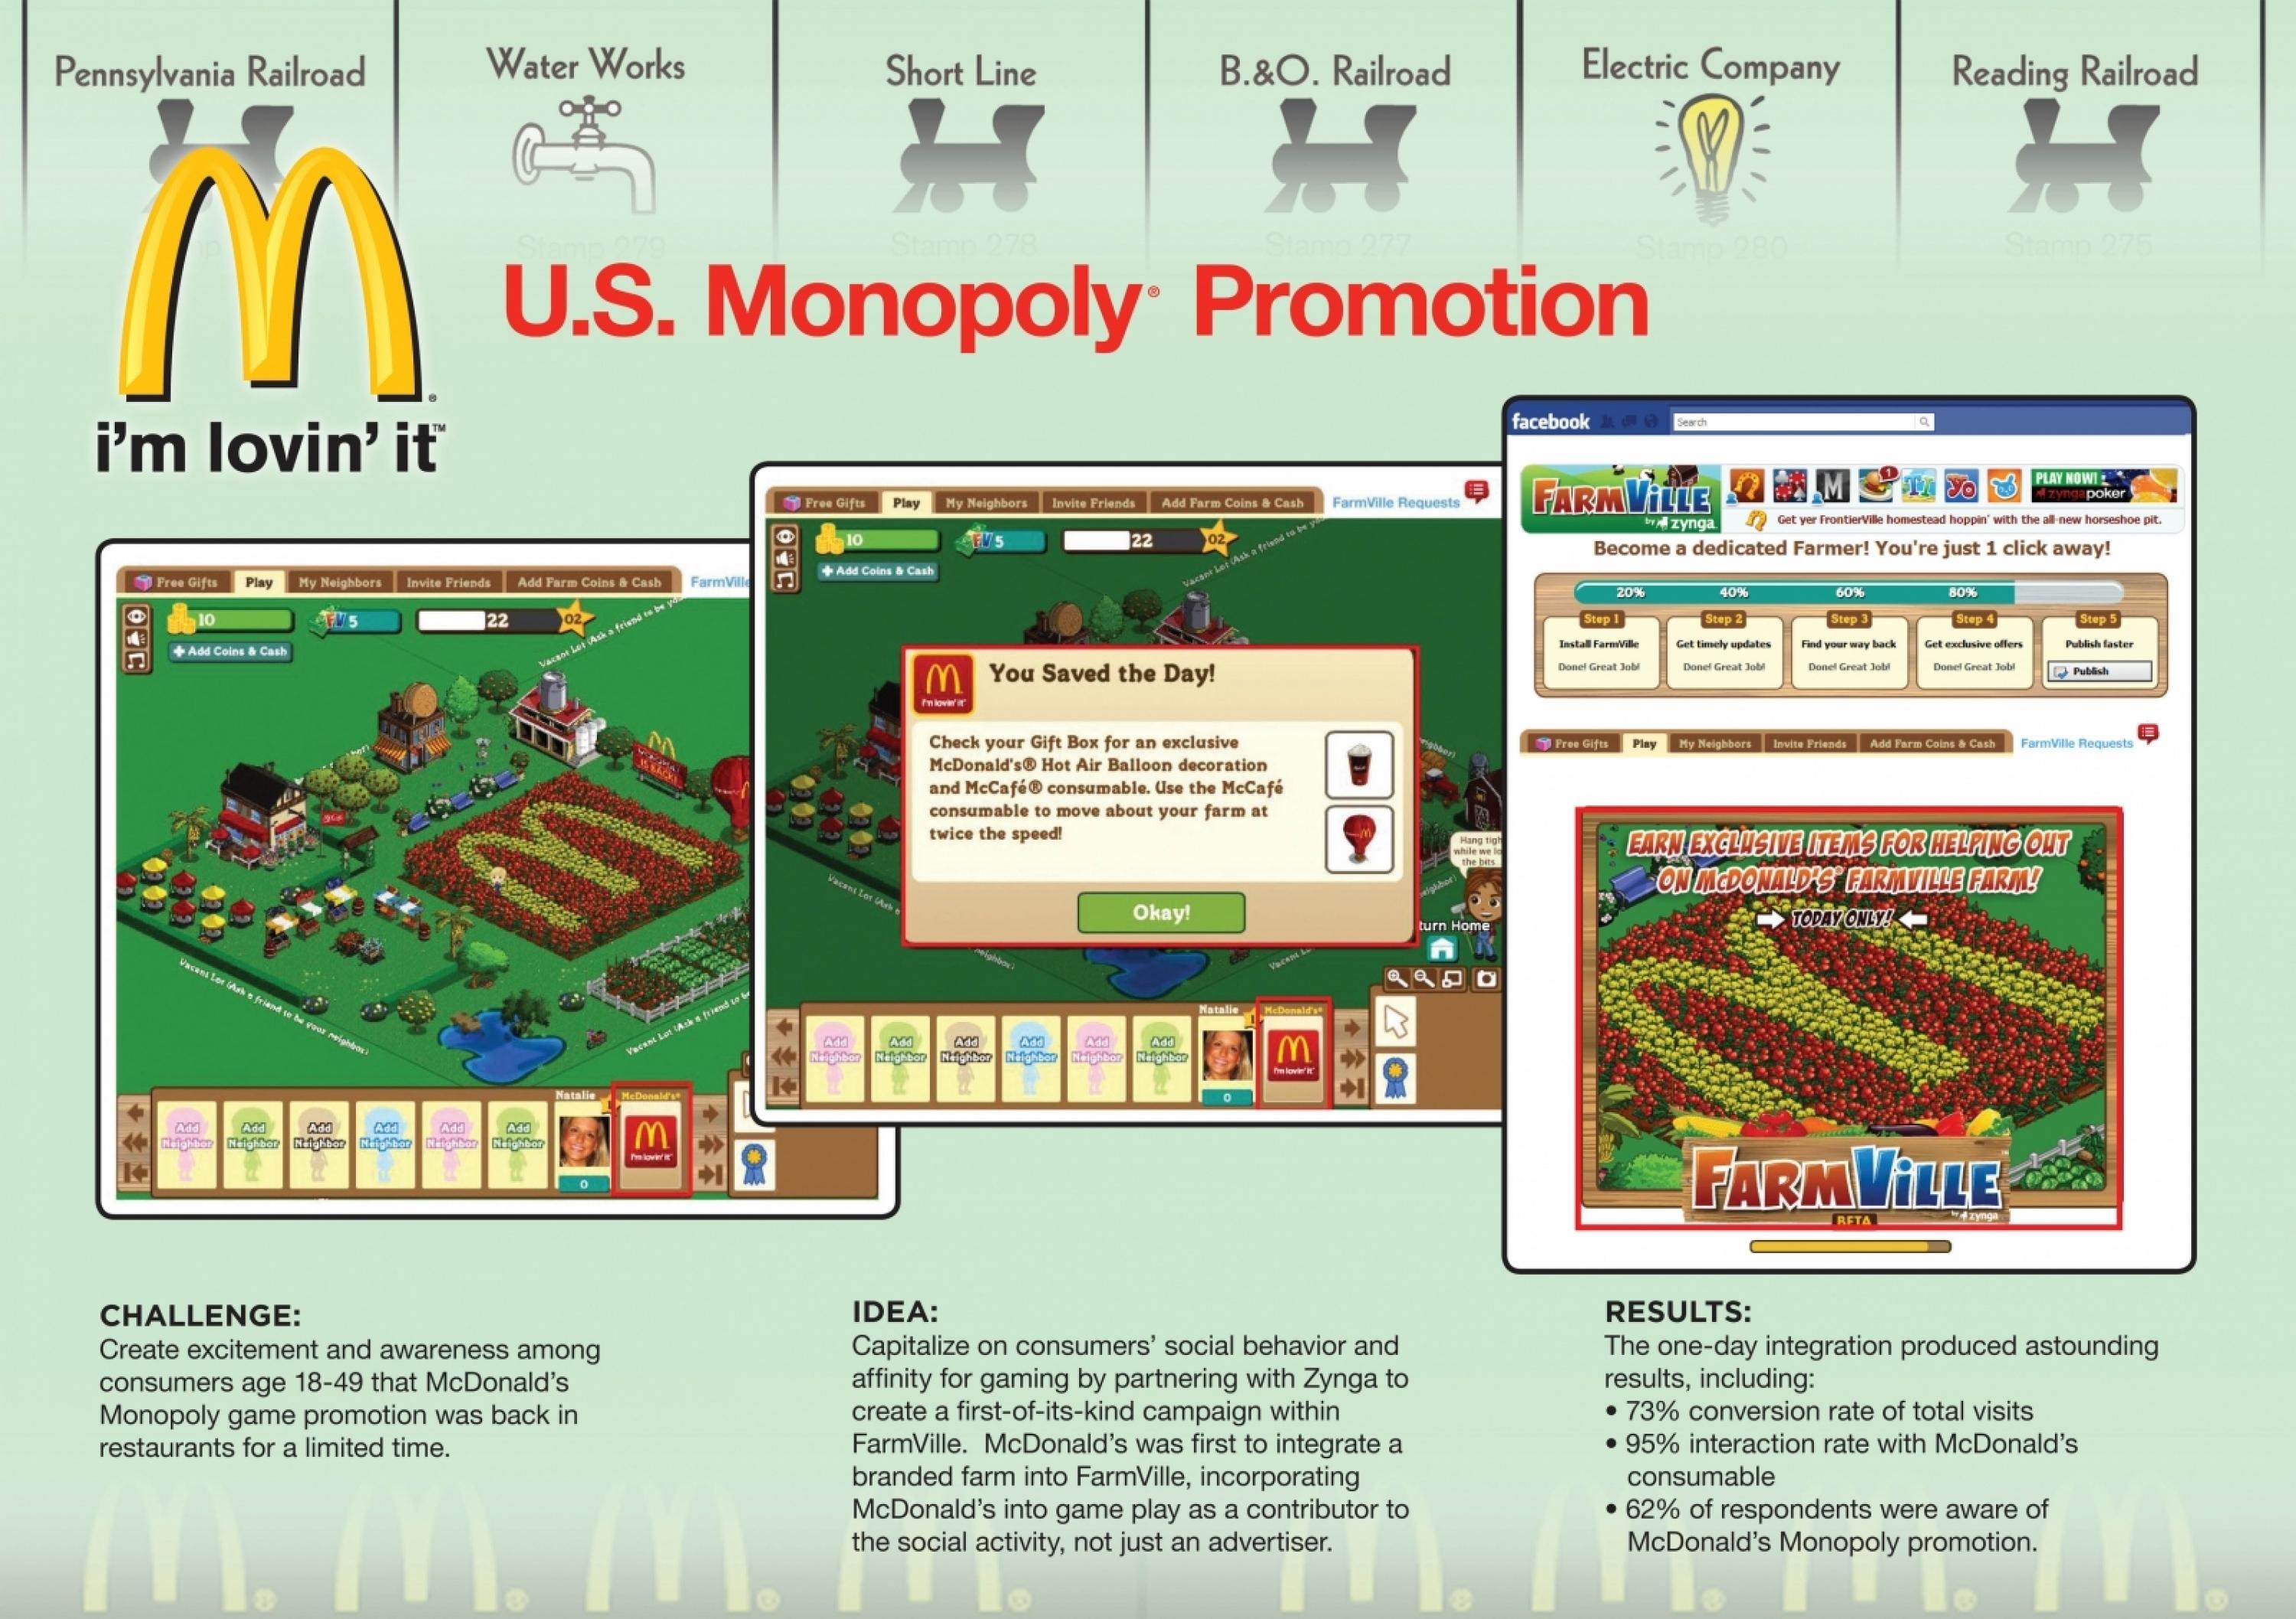 MONOPOLY GAME PROMOTION